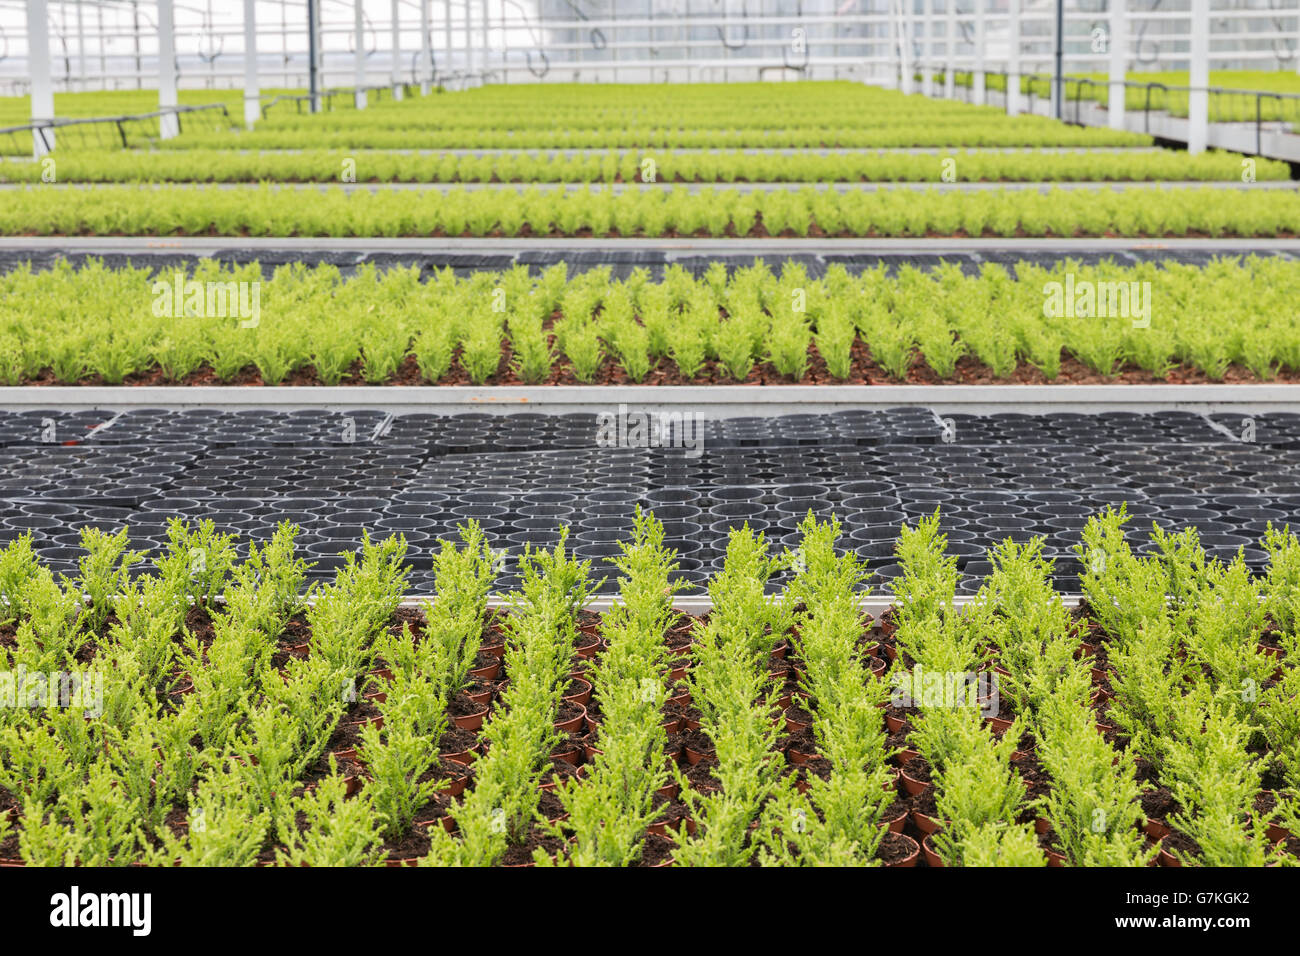 Dutch horticulture with cypresses growing in a greenhouse Stock Photo